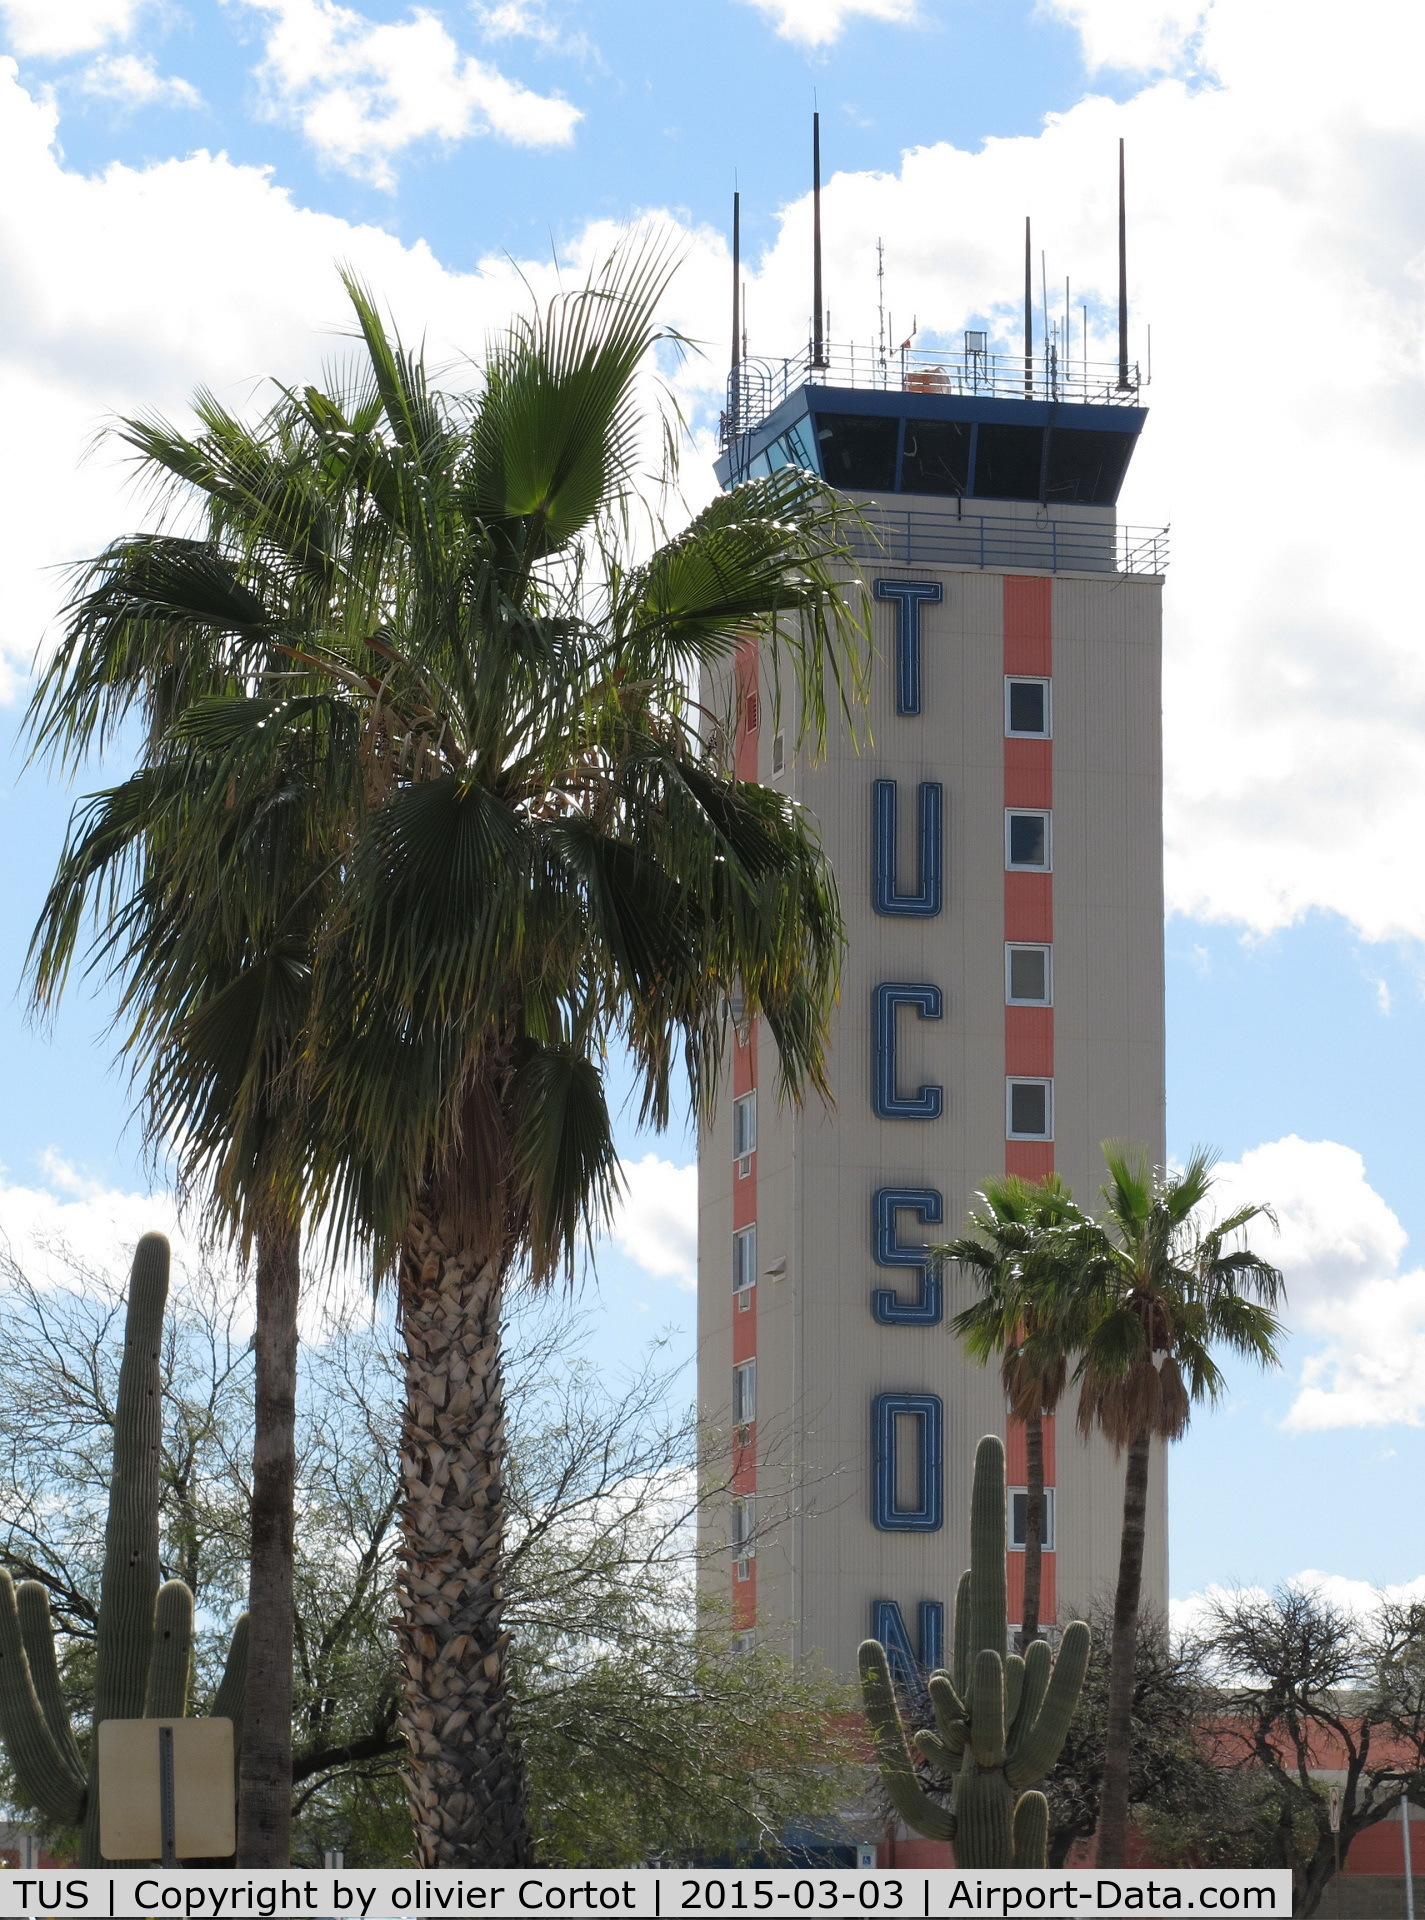 Tucson International Airport (TUS) - the control tower